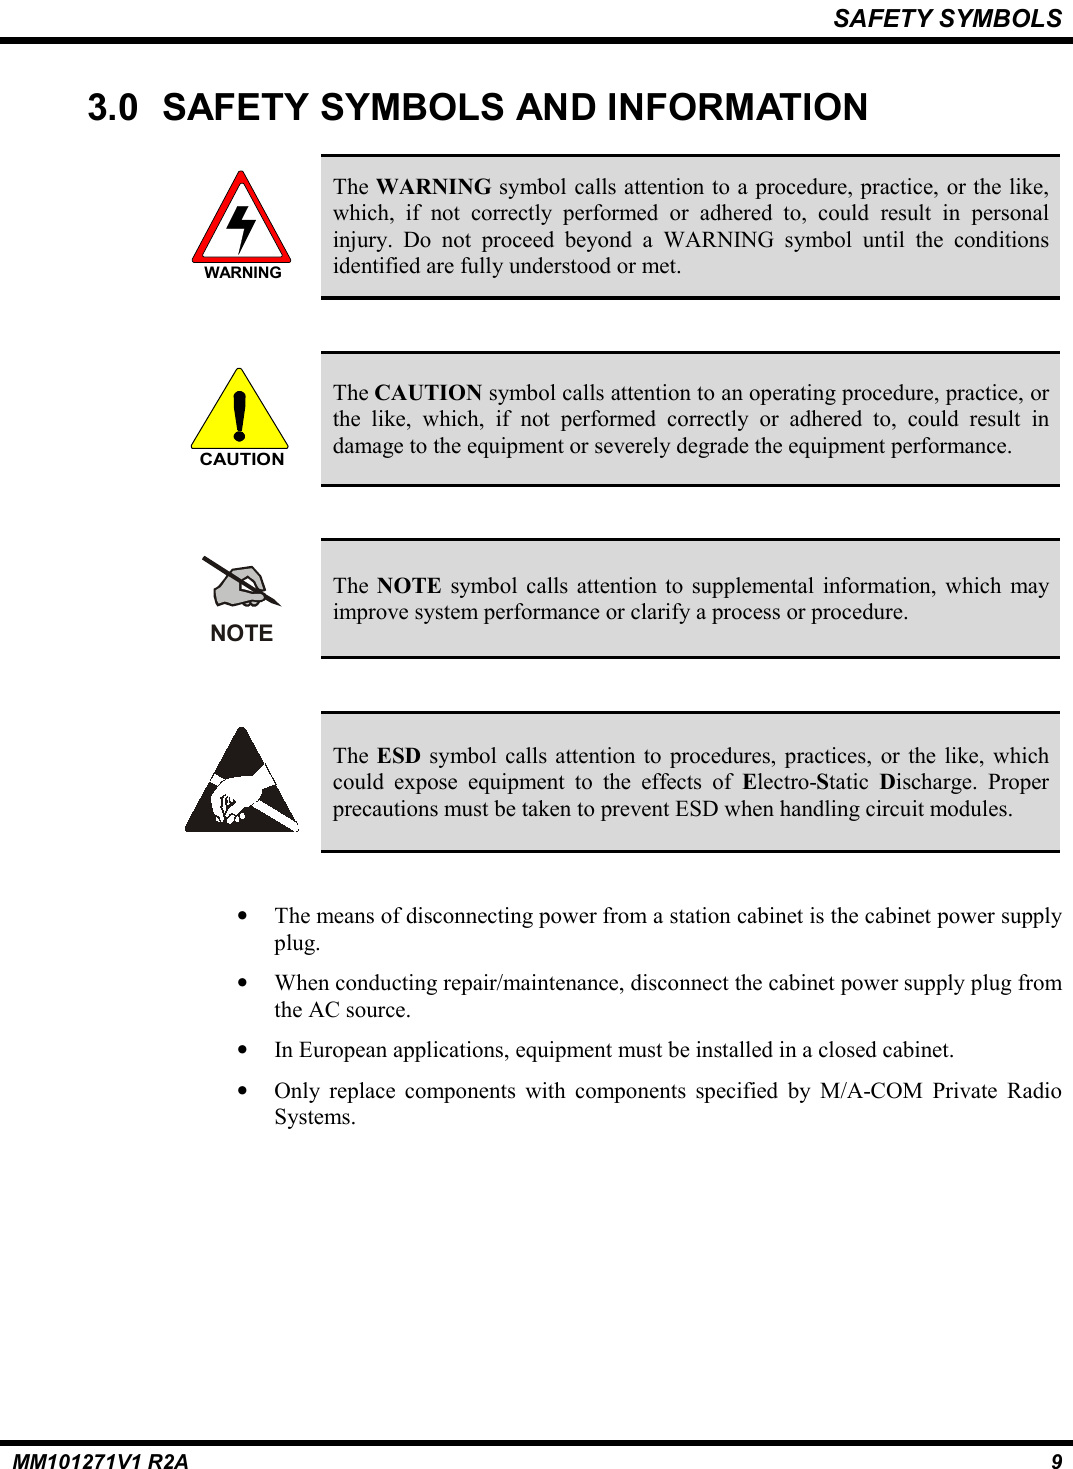 SAFETY SYMBOLSMM101271V1 R2A 93.0  SAFETY SYMBOLS AND INFORMATIONWARNINGThe WARNING symbol calls attention to a procedure, practice, or the like,which, if not correctly performed or adhered to, could result in personalinjury. Do not proceed beyond a WARNING symbol until the conditionsidentified are fully understood or met.CAUTIONThe CAUTION symbol calls attention to an operating procedure, practice, orthe like, which, if not performed correctly or adhered to, could result indamage to the equipment or severely degrade the equipment performance.NOTEThe NOTE symbol calls attention to supplemental information, which mayimprove system performance or clarify a process or procedure.The ESD symbol calls attention to procedures, practices, or the like, whichcould expose equipment to the effects of Electro-Static  Discharge. Properprecautions must be taken to prevent ESD when handling circuit modules.• The means of disconnecting power from a station cabinet is the cabinet power supplyplug.• When conducting repair/maintenance, disconnect the cabinet power supply plug fromthe AC source.• In European applications, equipment must be installed in a closed cabinet.• Only replace components with components specified by M/A-COM Private RadioSystems.